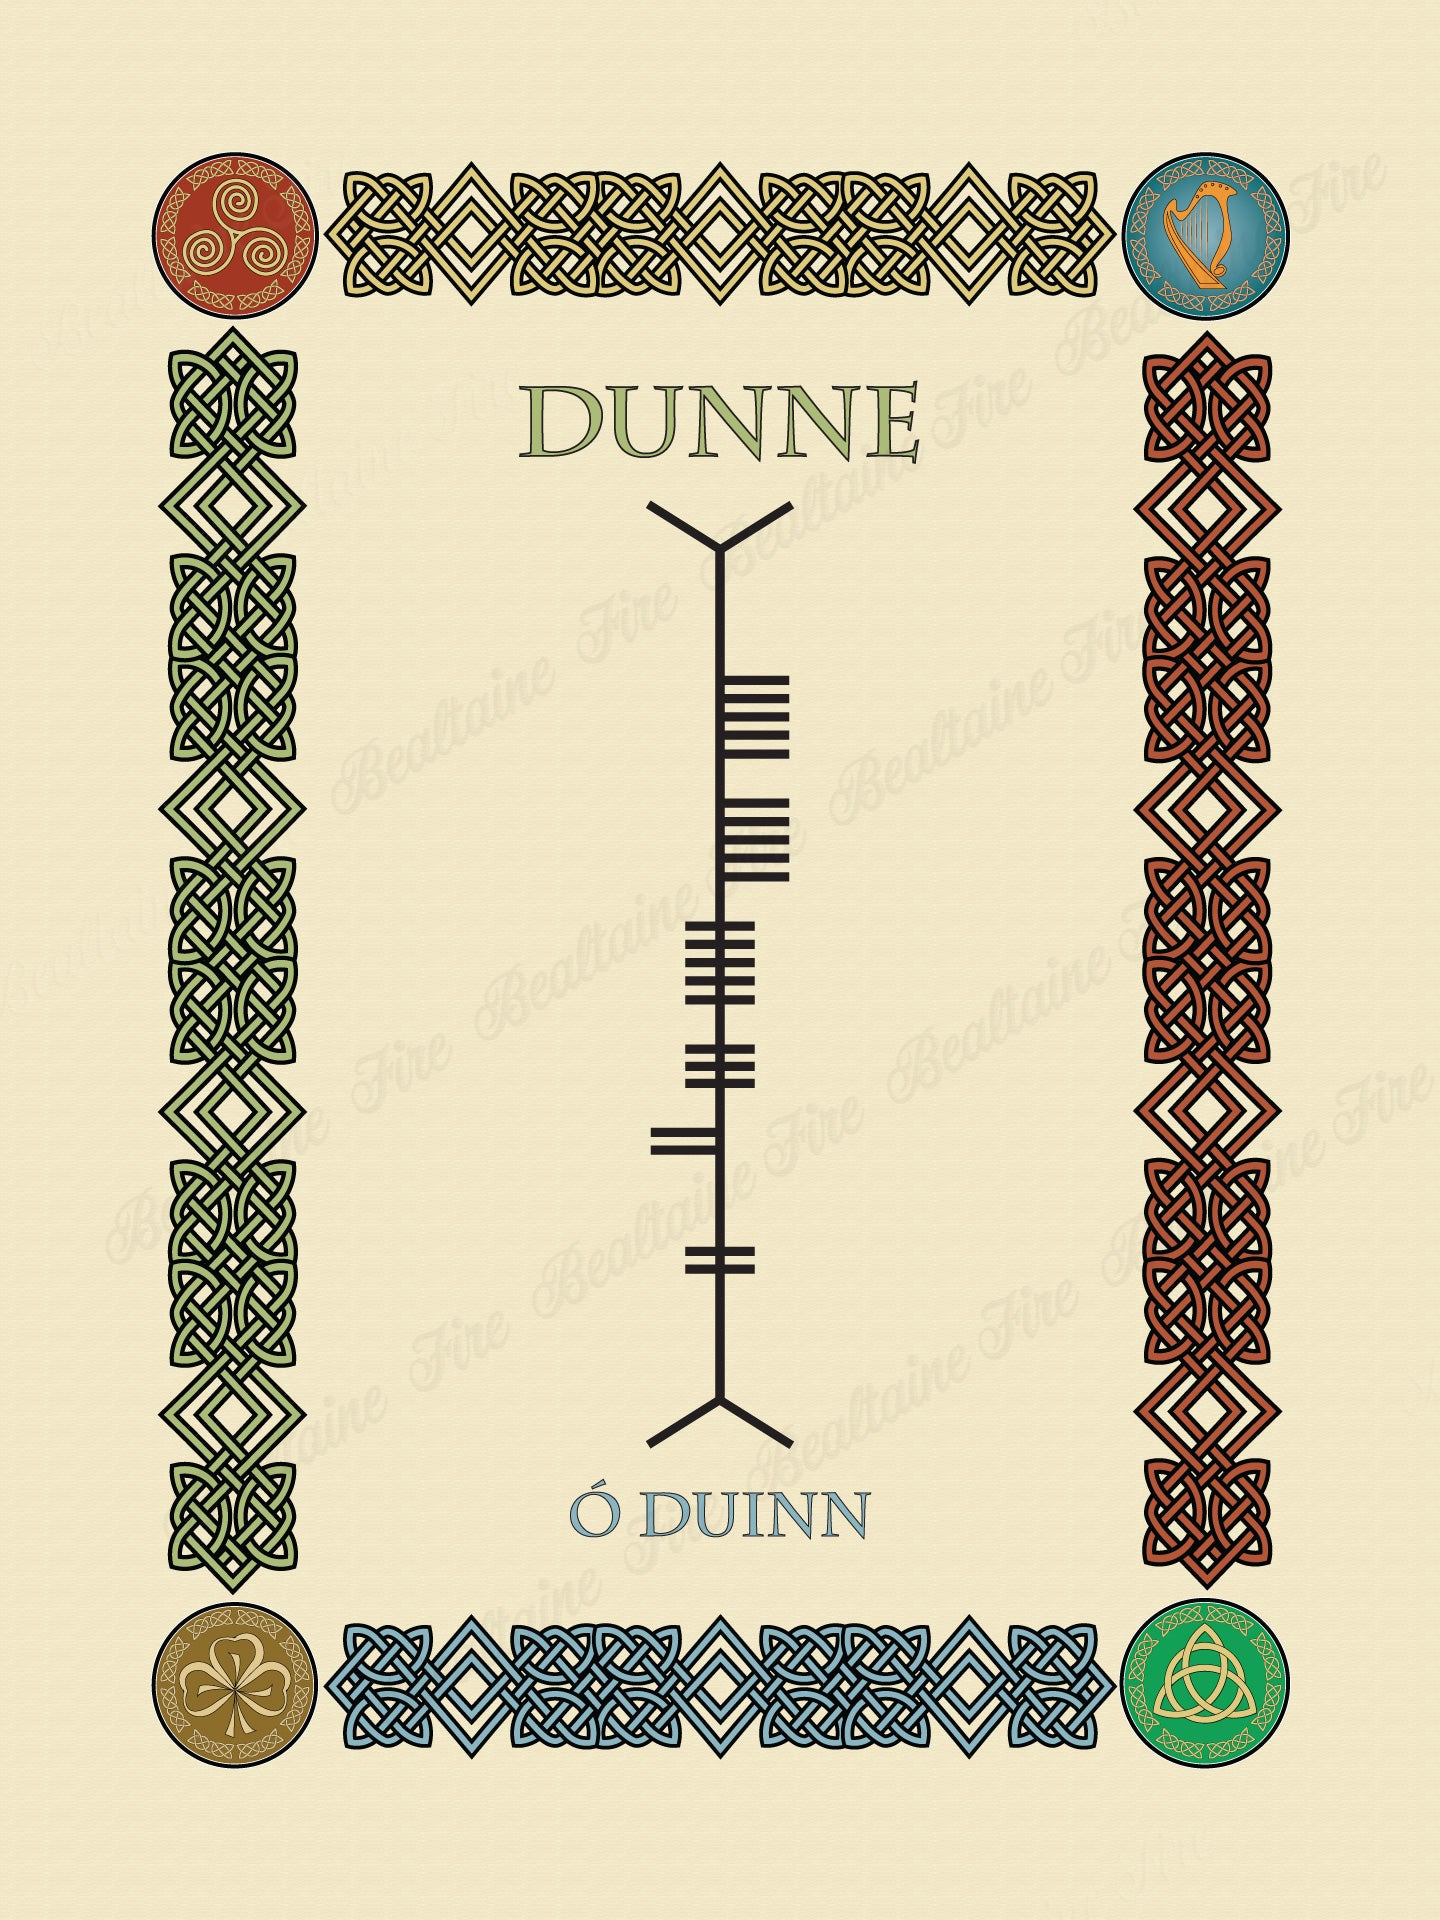 Dunne in Old Irish and Ogham - PDF Download